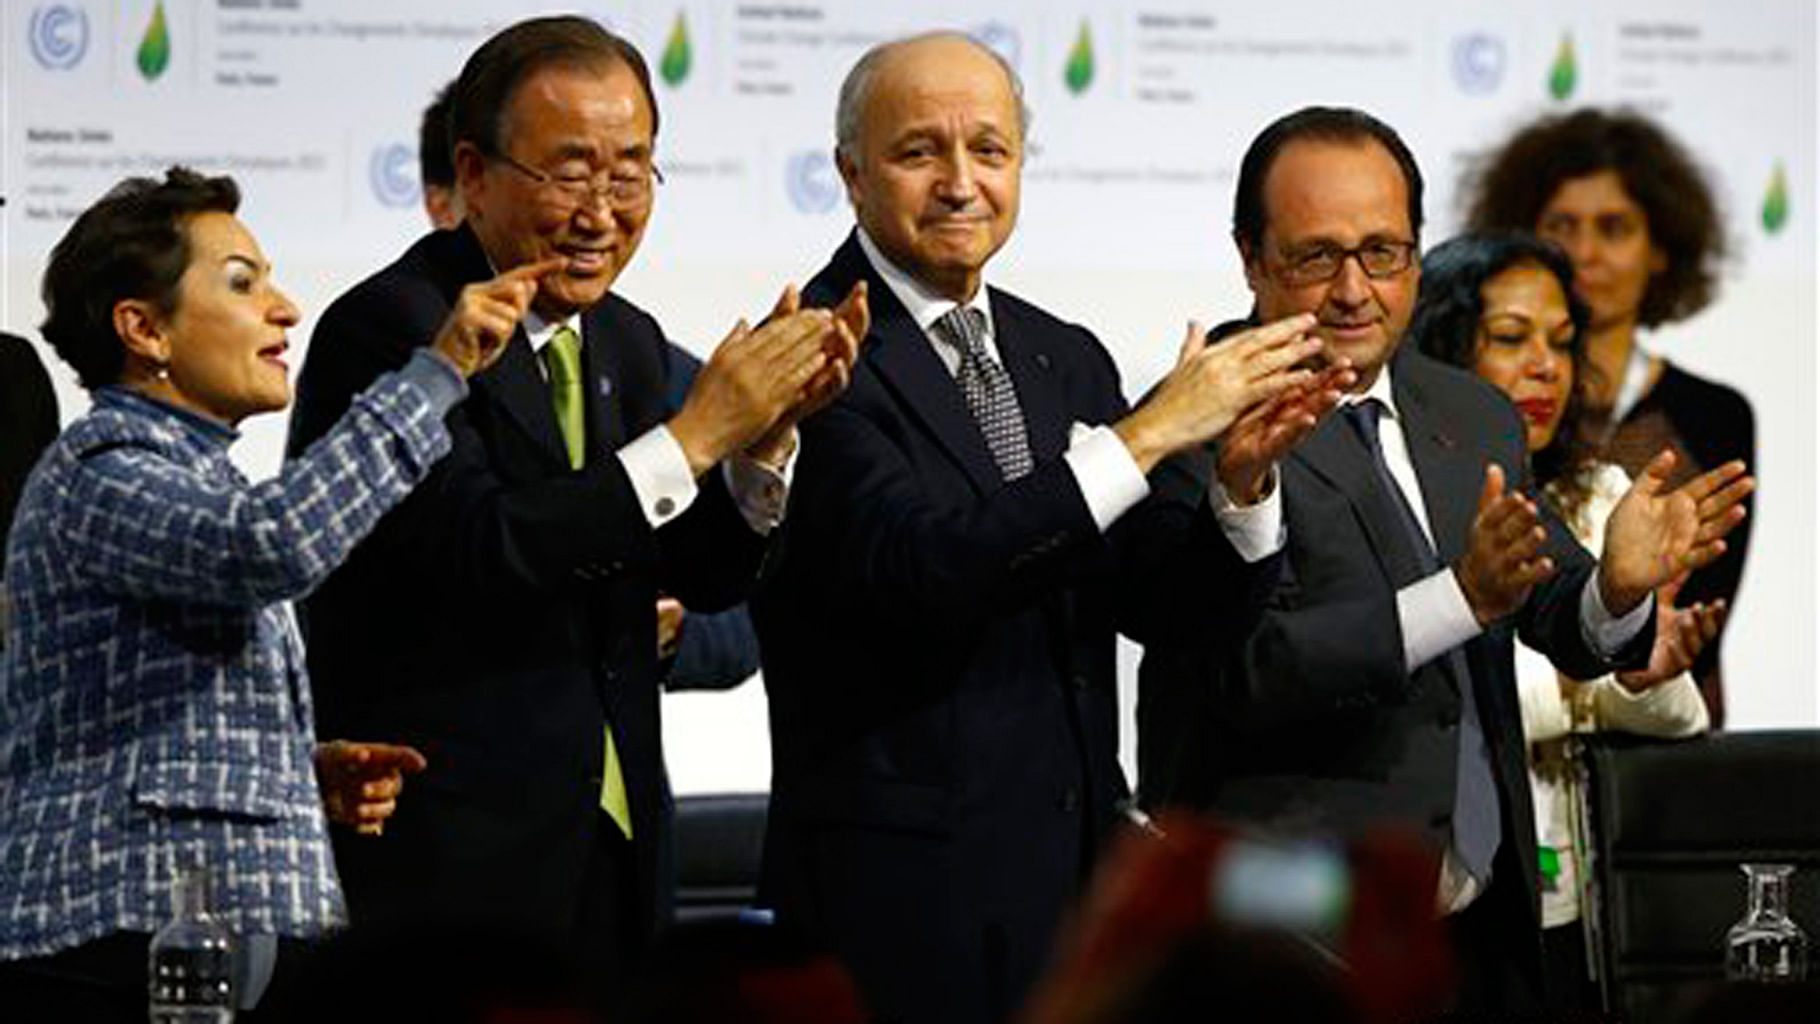 From the right French President Francois Hollande, French Foreign Minister and President of the COP21 Laurent Fabius, UN Secretary General Ban ki-Moon and UN Climate Chief Christiana Figueres applaud after the final conference at the COP21 in Paris on Saturday. (Photo: AP)